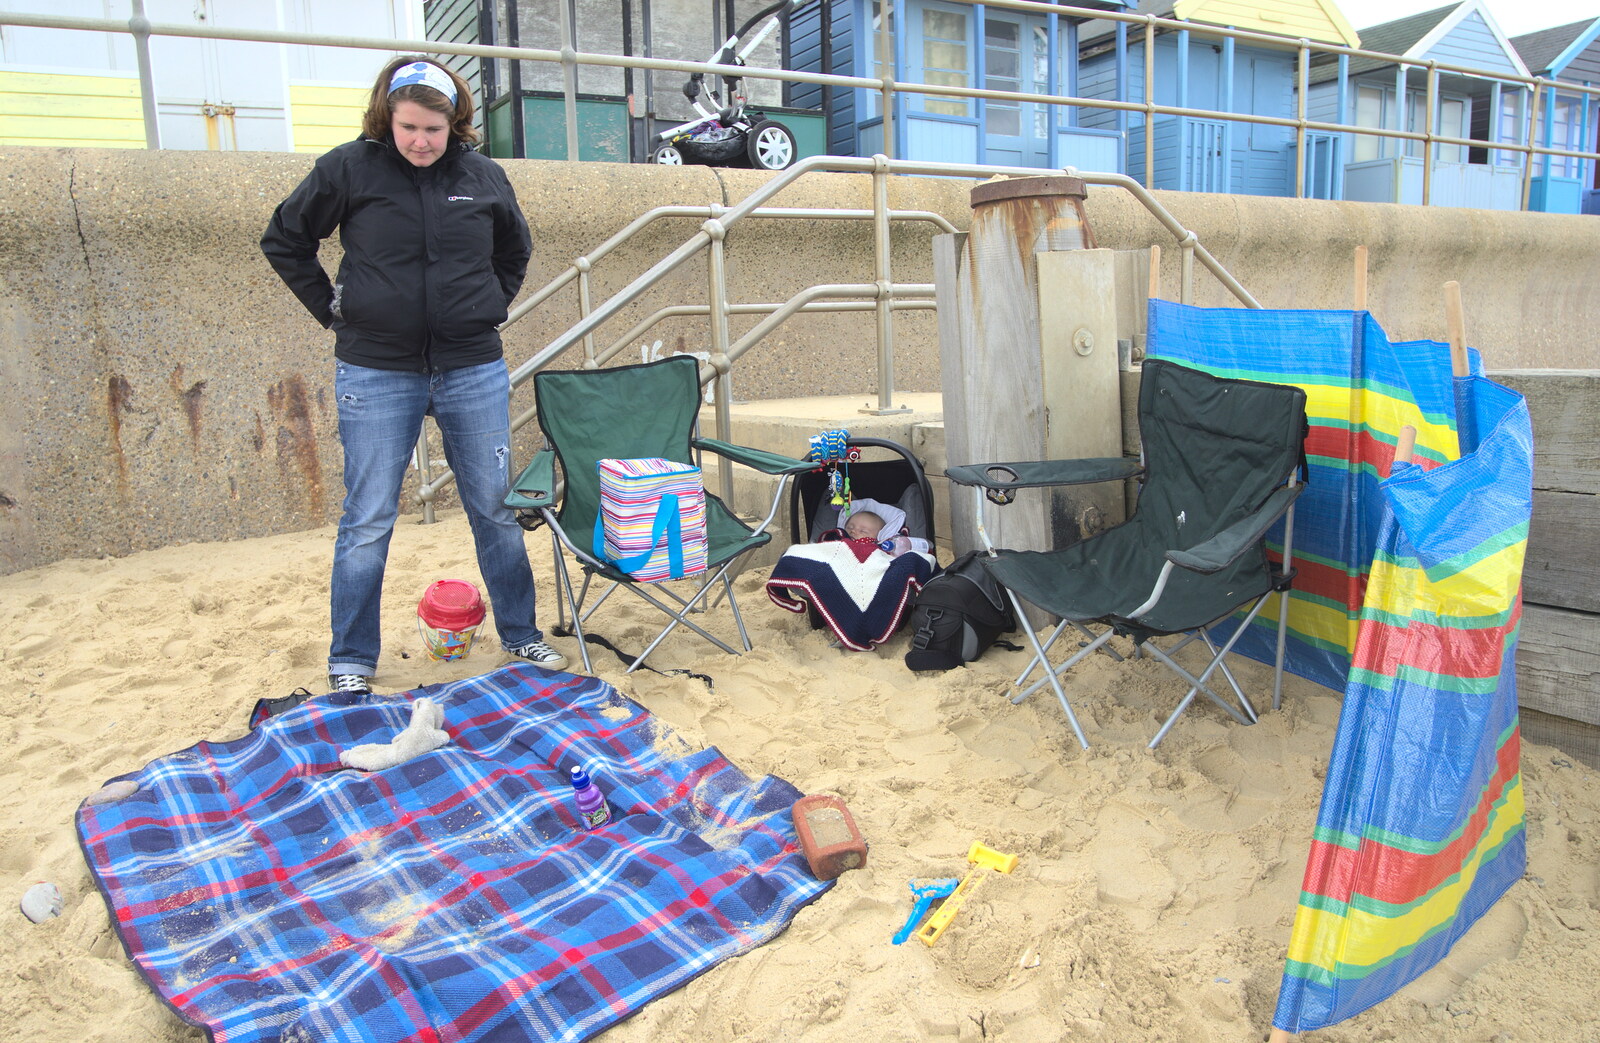 Picnic blanket, windbreak and Mr Cheese from A Night at the Crown Hotel, Southwold, Suffolk - 13th June 2012